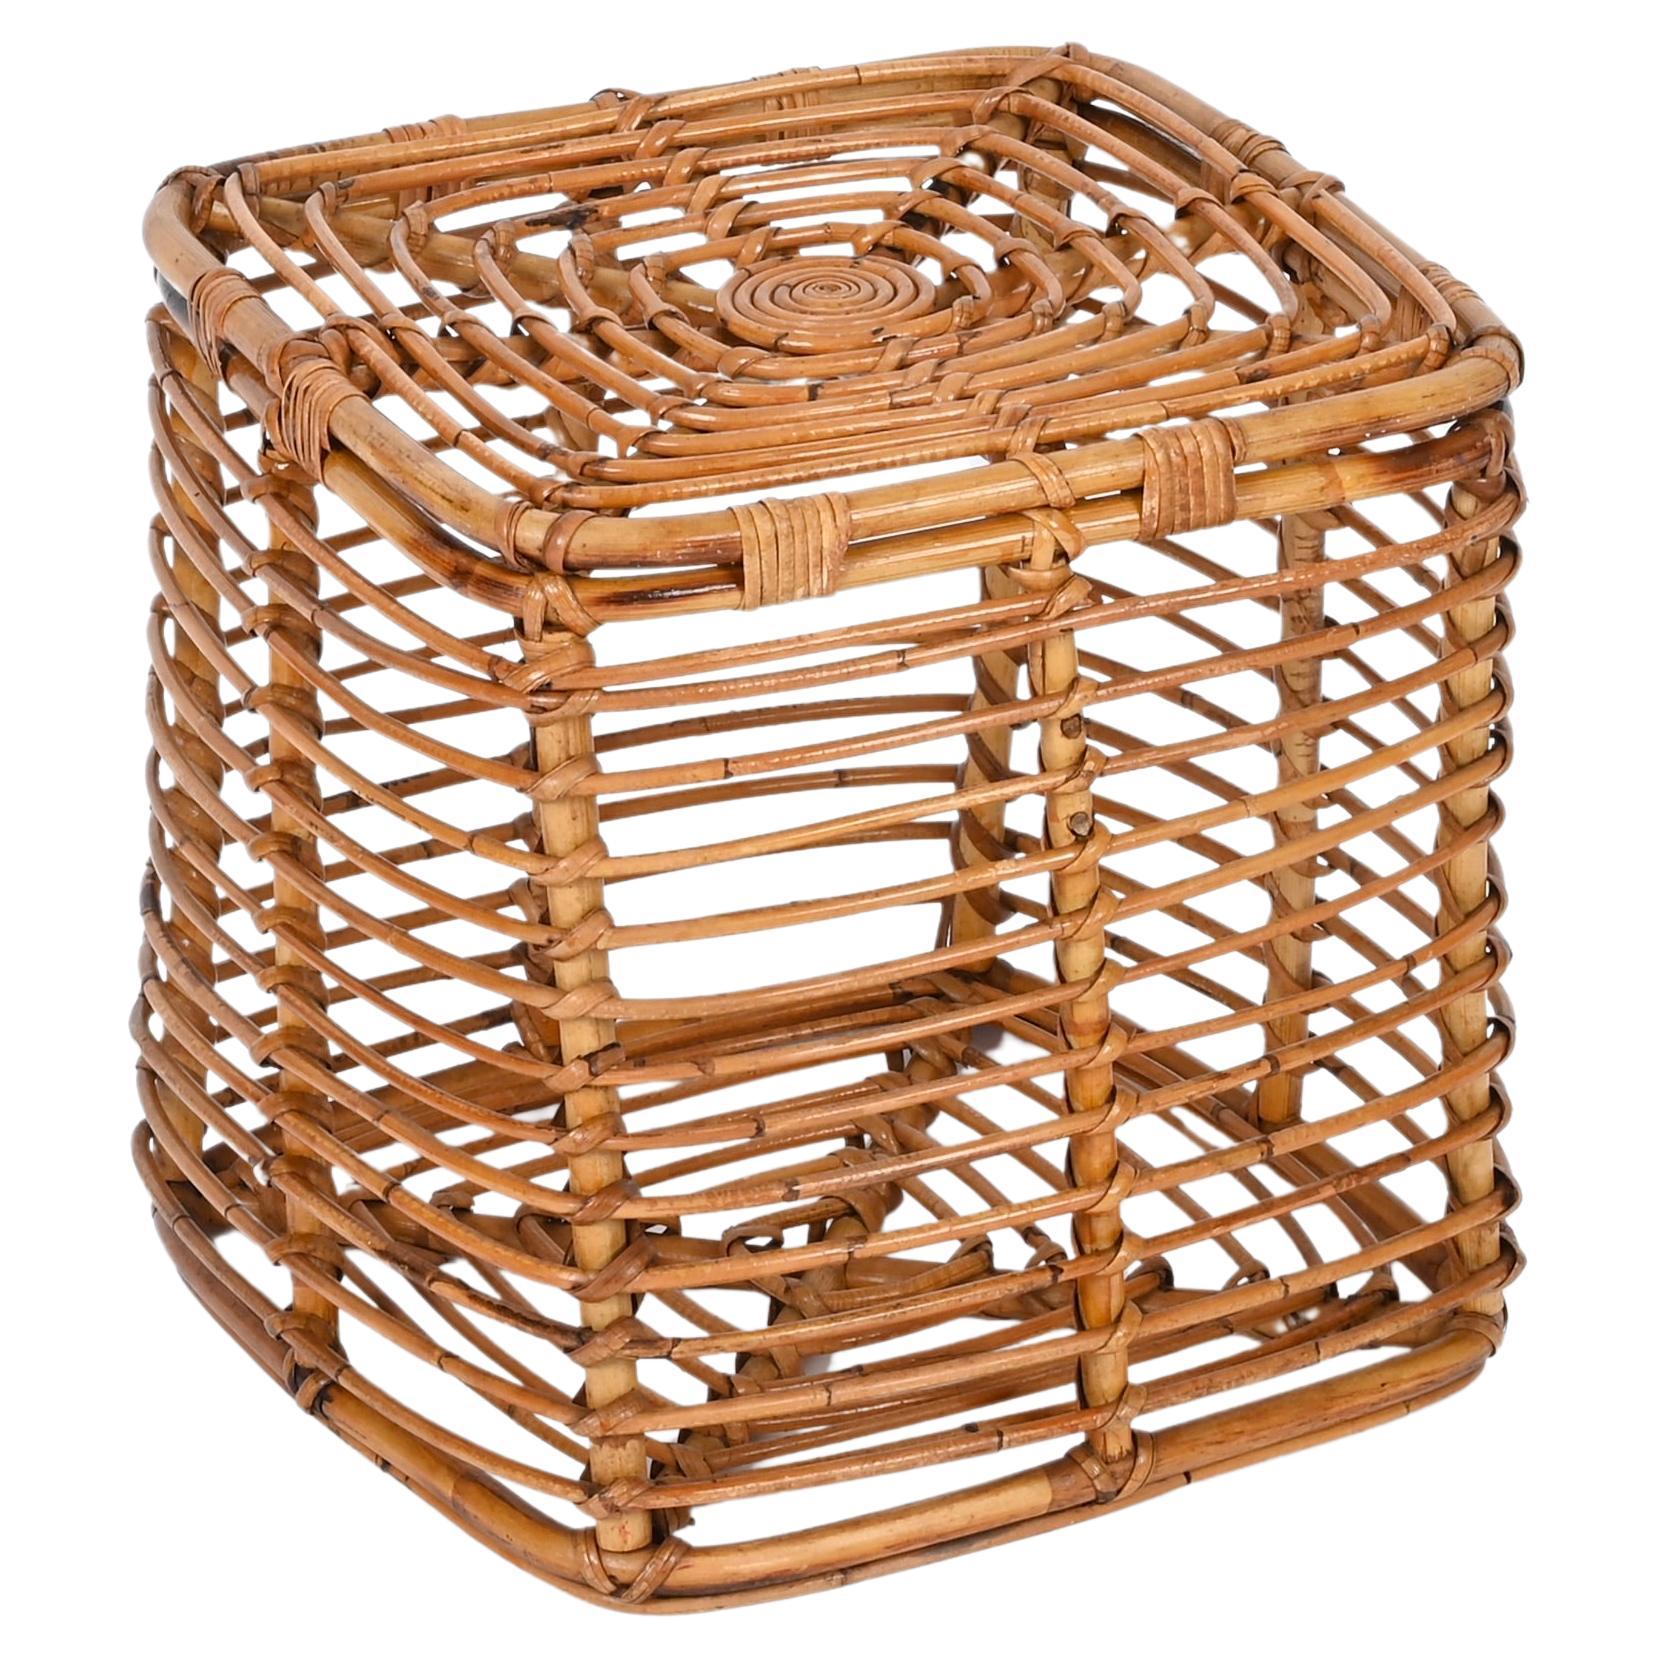 Midcentury Tito Agnoli Rattan and Wicker Square Pouf Stool, Italy, 1970s For Sale